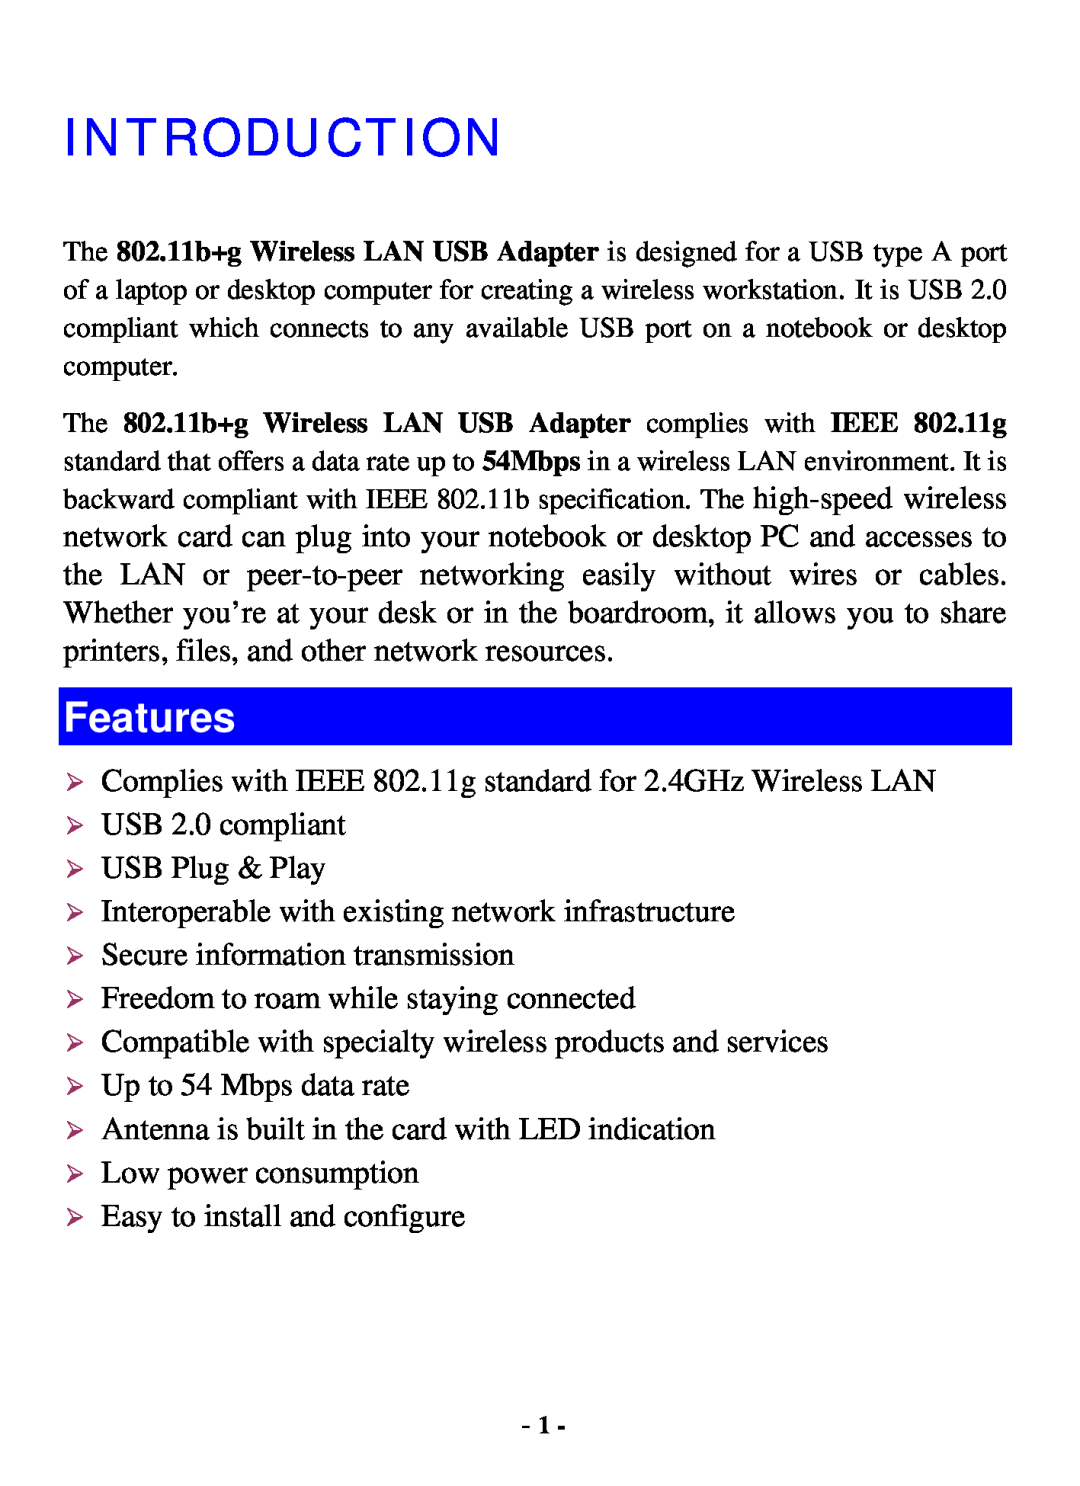 Xterasys USB Adapter user manual Introduction, Features 